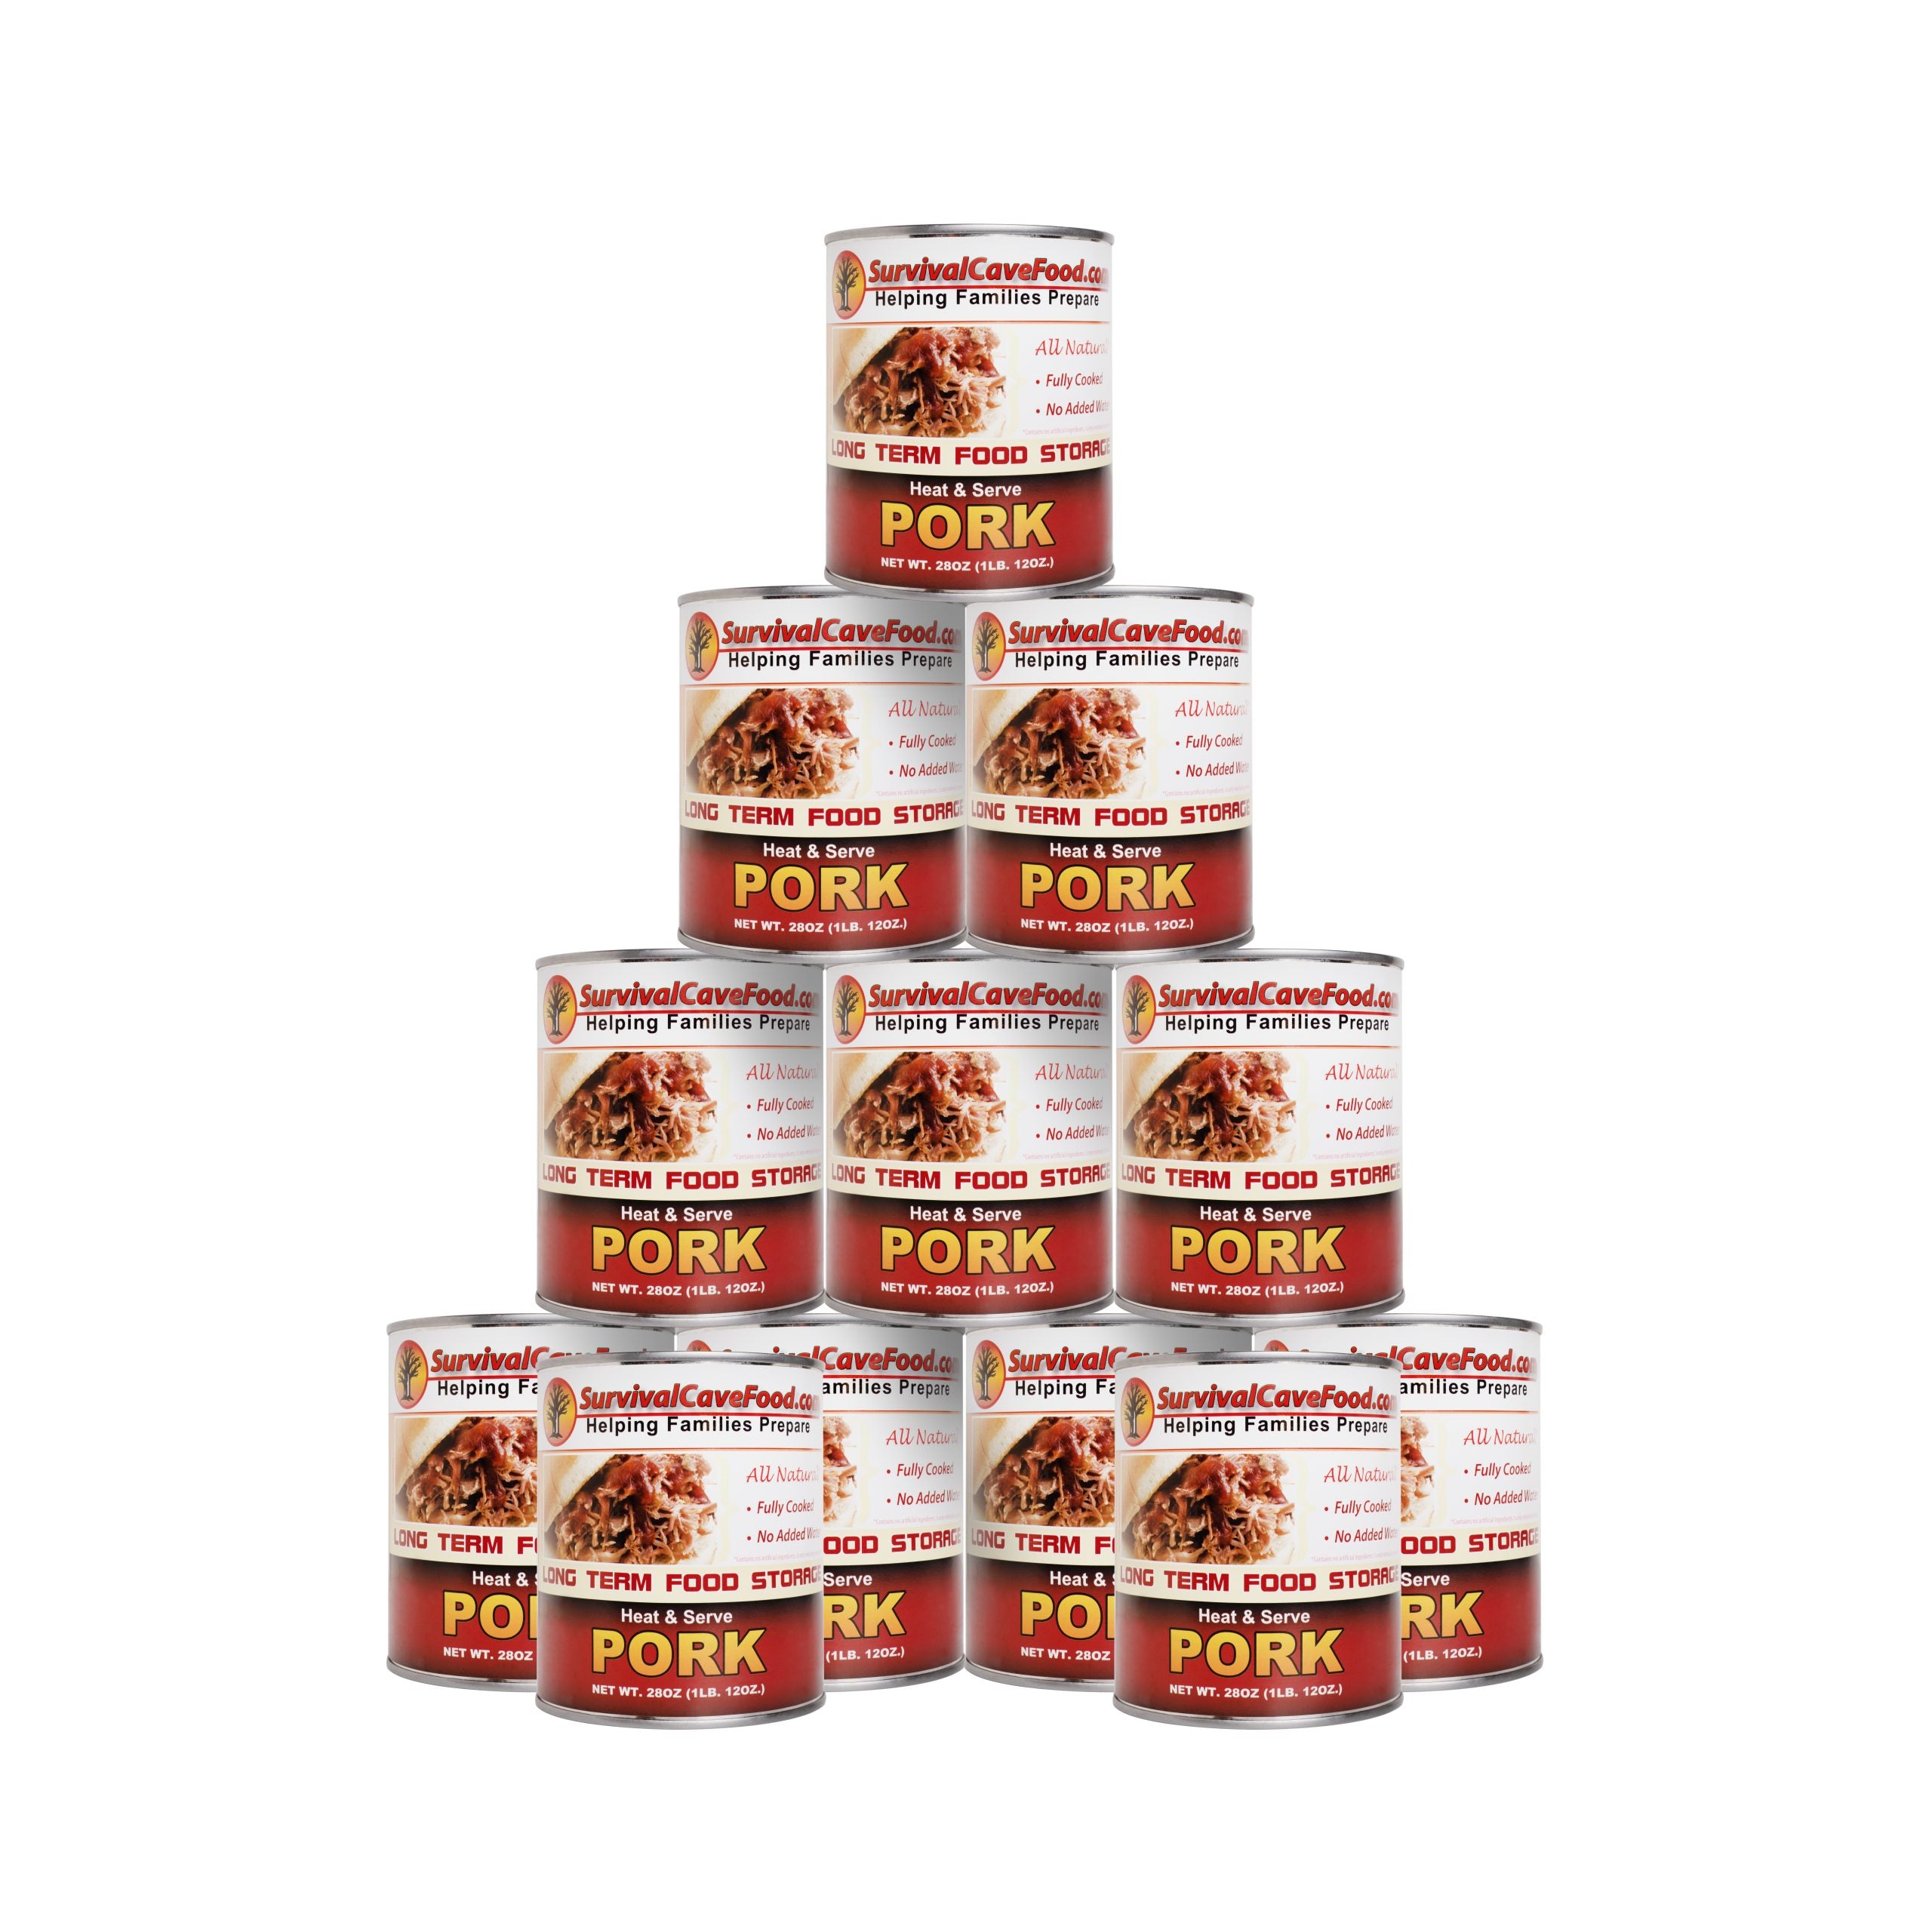 Survival Cave Pork 12 – 28 oz Cans – Ready to Eat Canned Meat